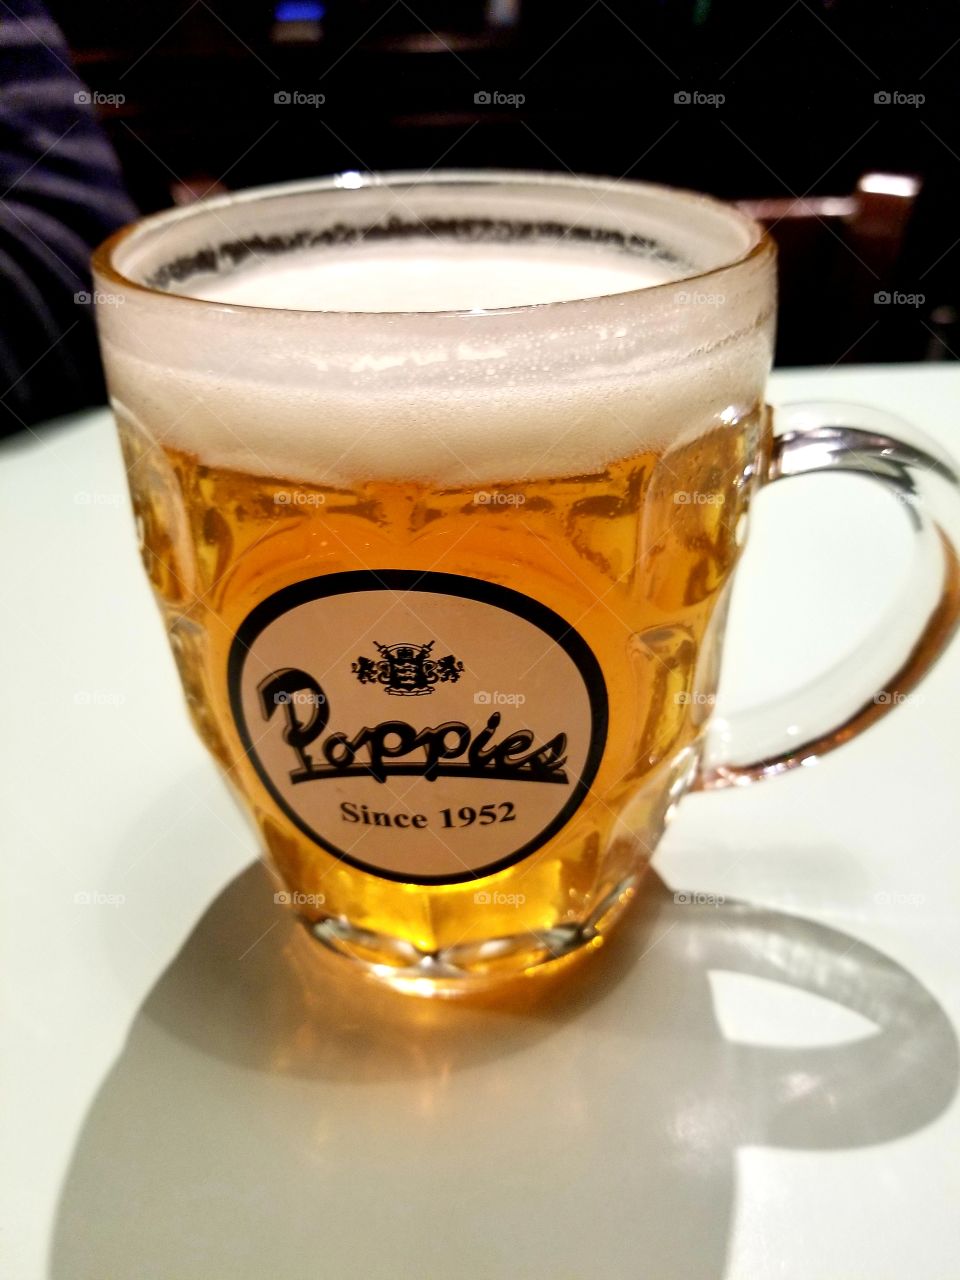 Poppies Ale